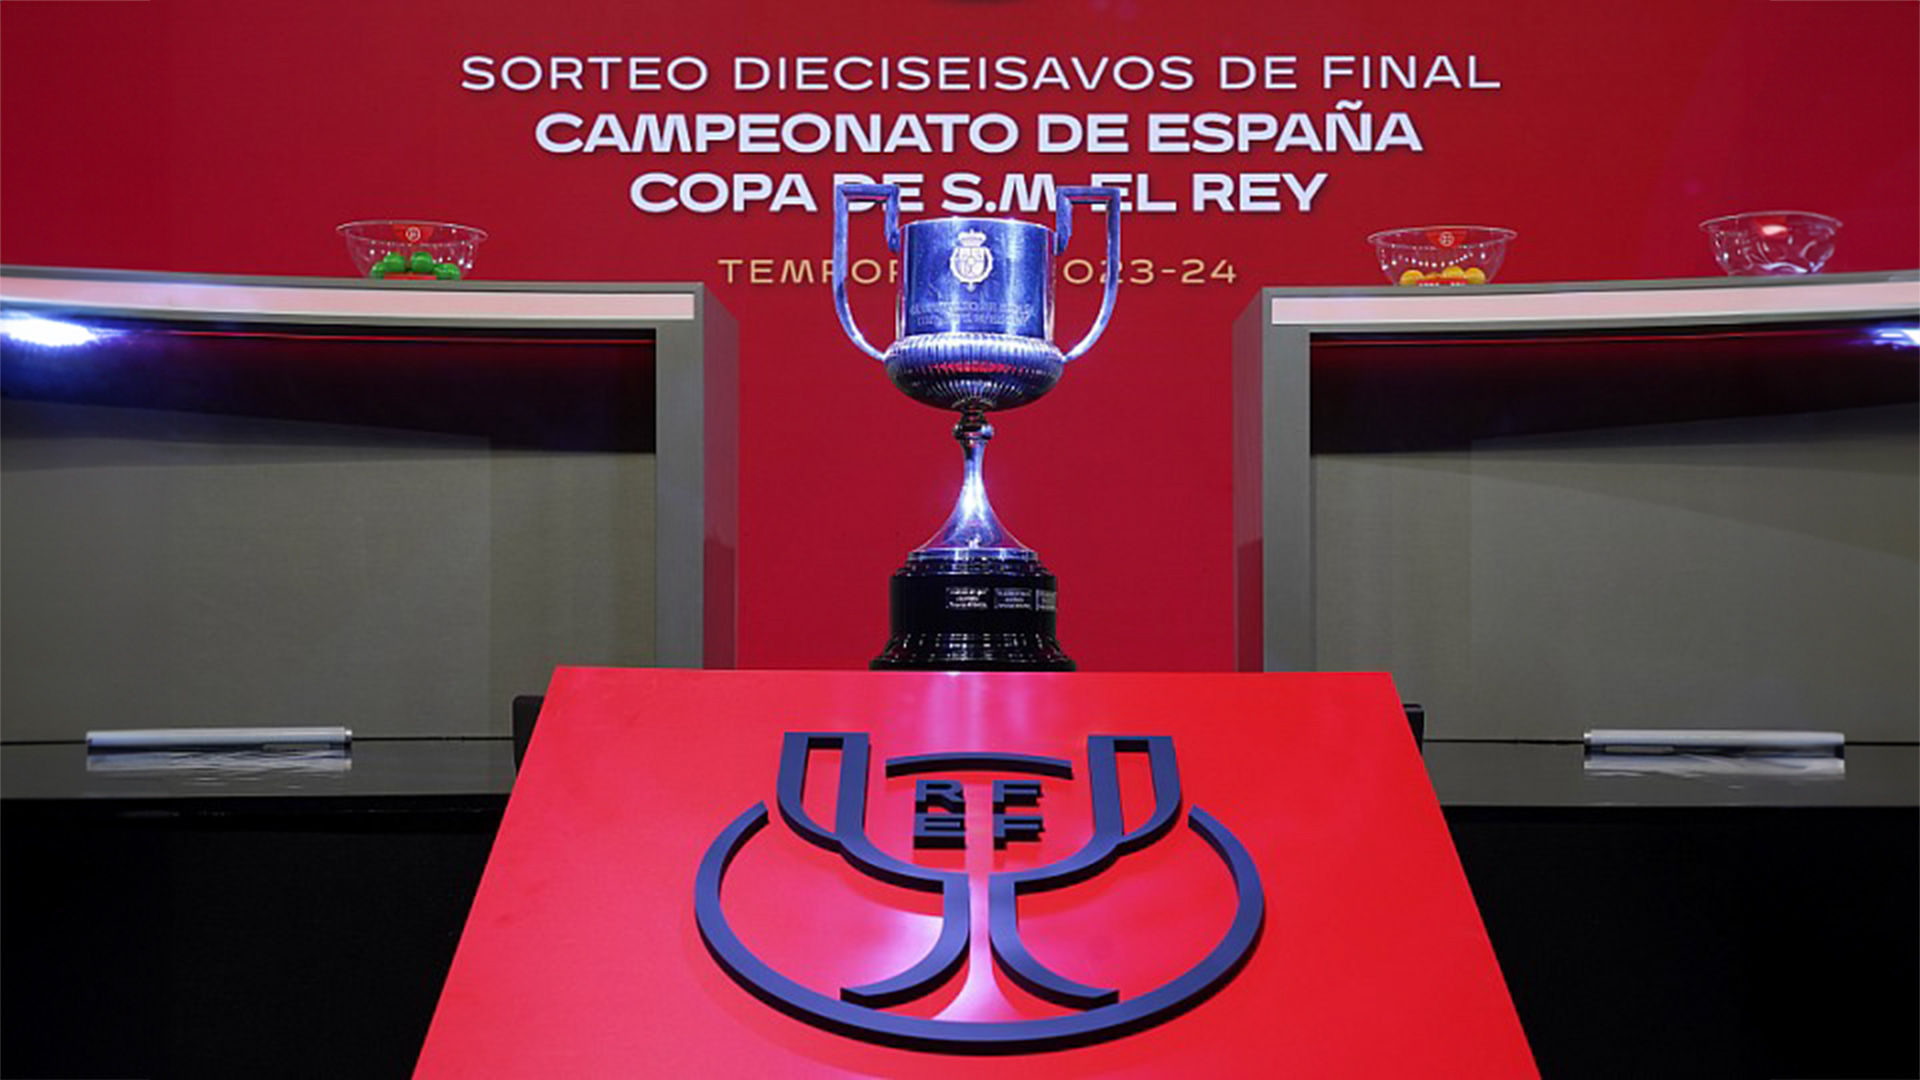 We will face Racing Club Ferrol in the Copa del Rey Round of 32